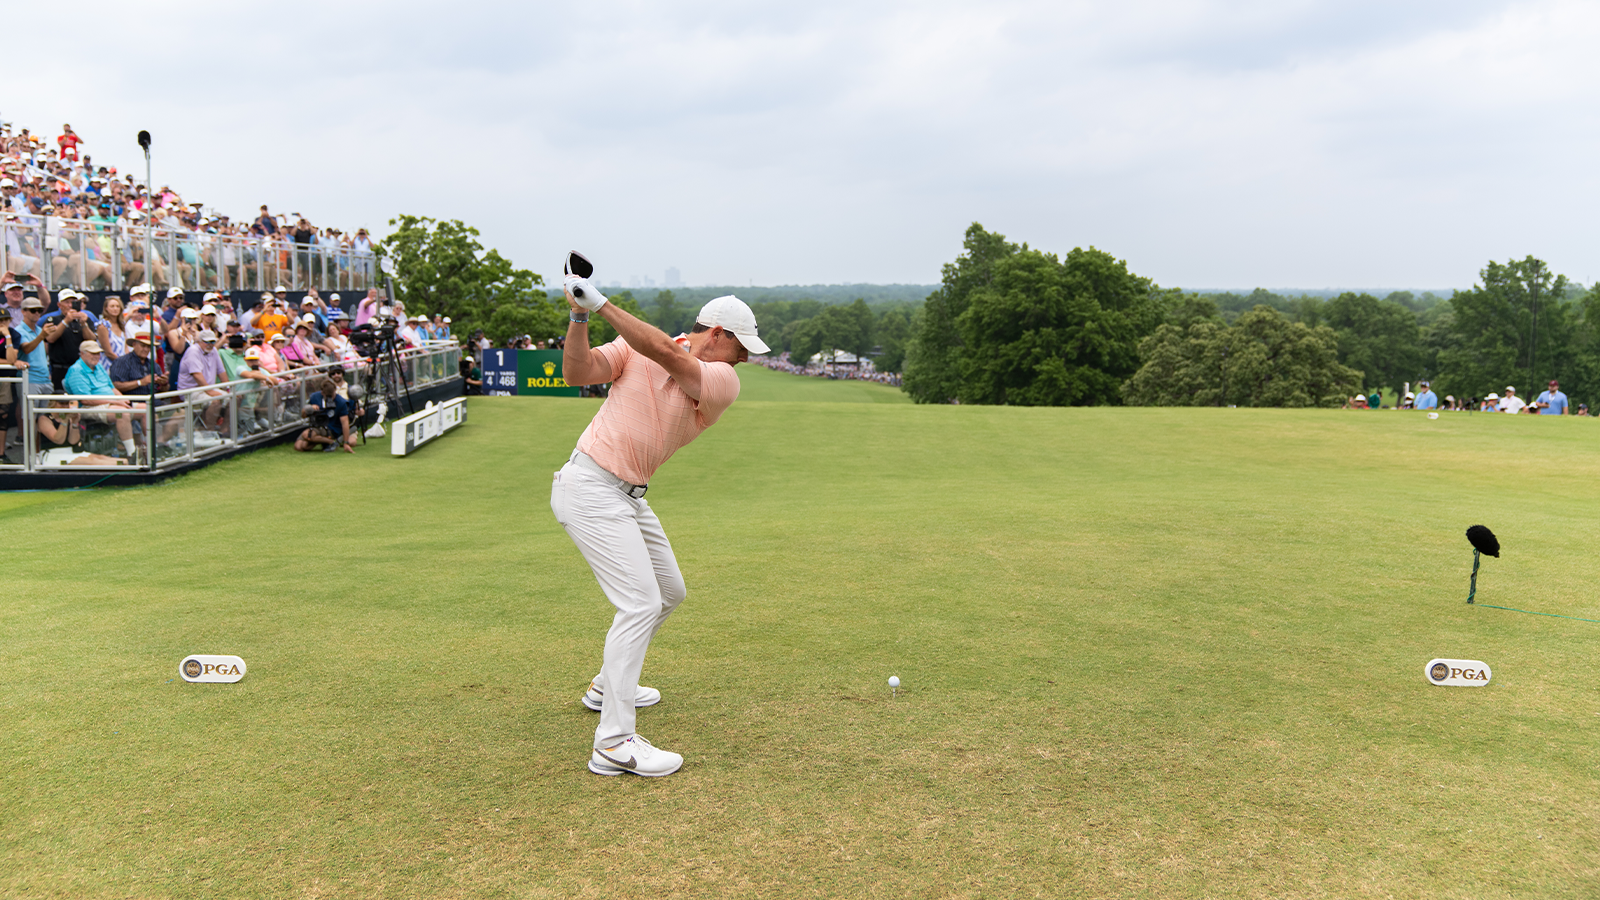 Rory McIlroy of Northern Ireland hits his shot from the first tee during the second round of the 2022 PGA Championship at the Southern Hills on May 20, 2022 in Tulsa, Oklahoma. (Photo by Darren Carroll/PGA of America)